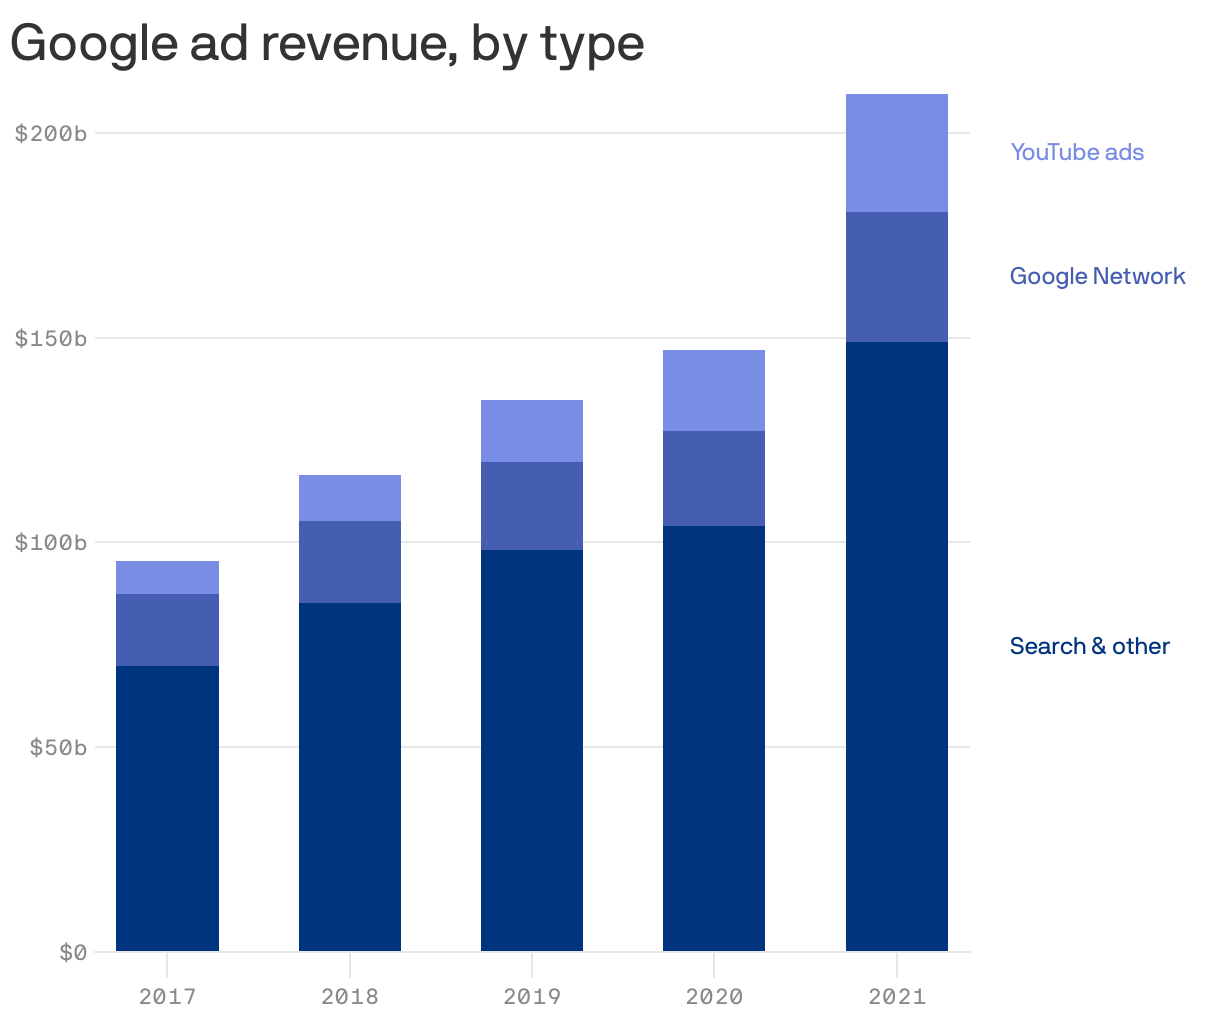 Google ad revenue, by type